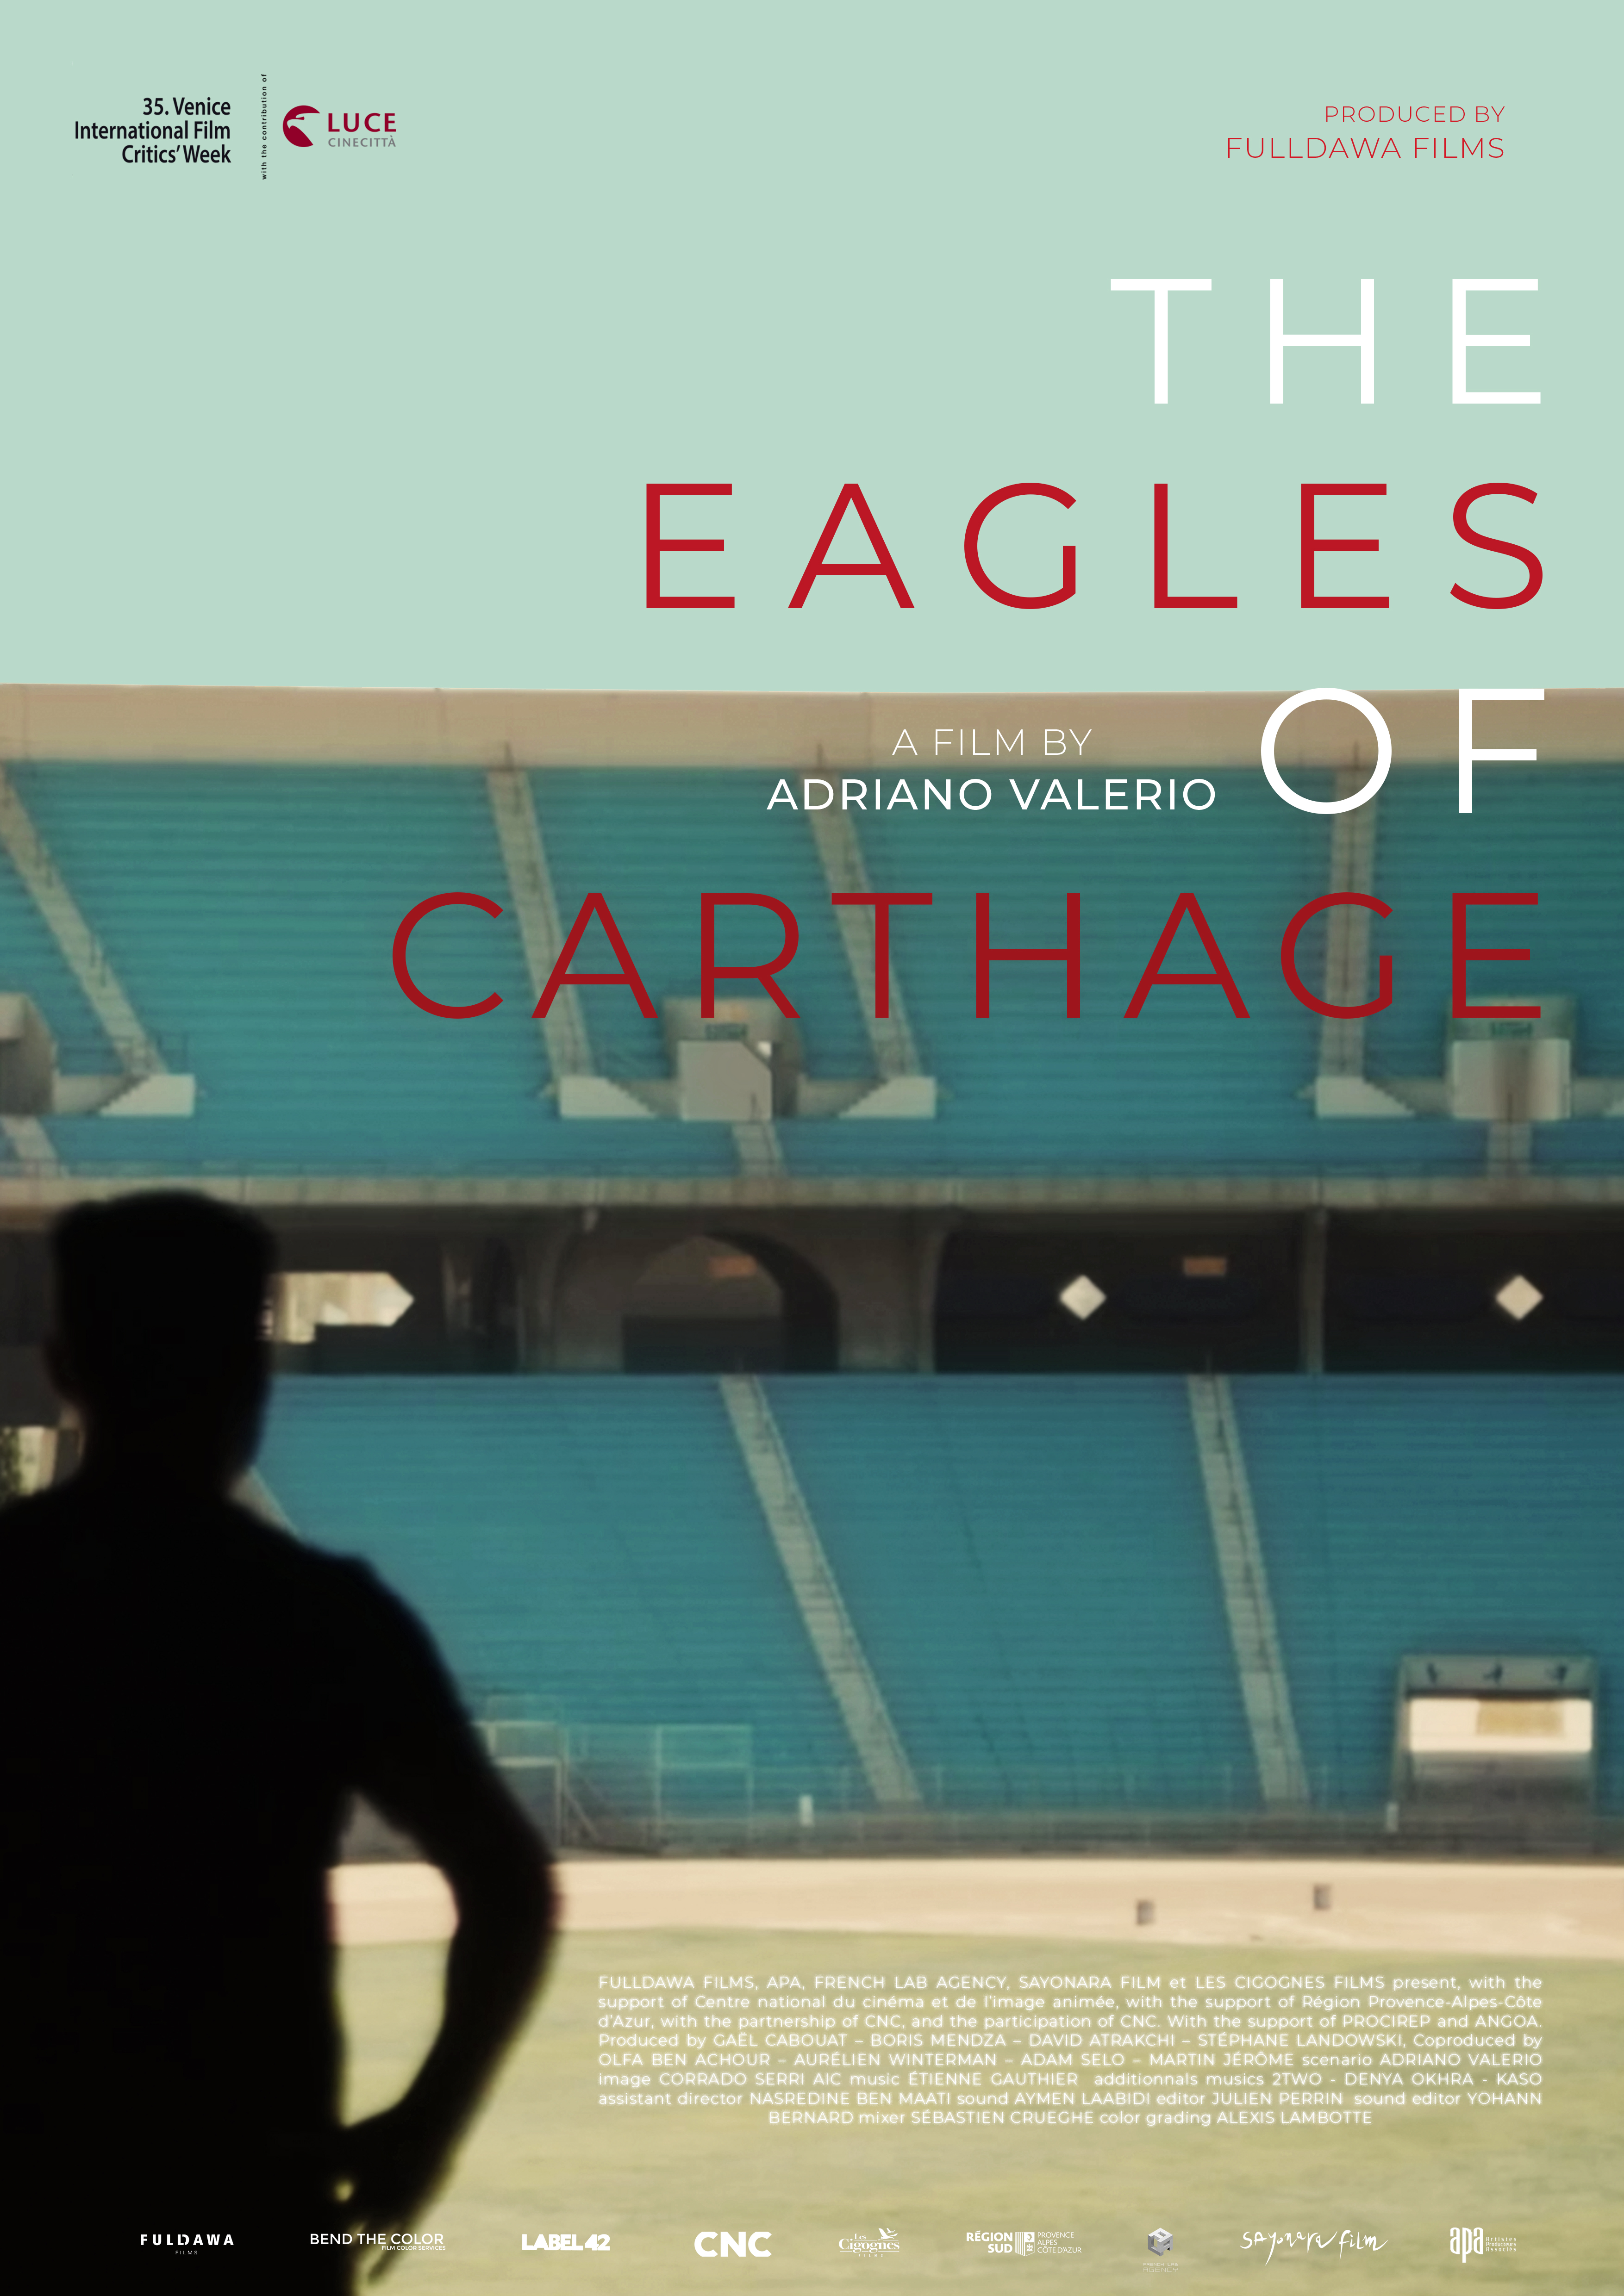 THE EAGLES OF CARTHAGE